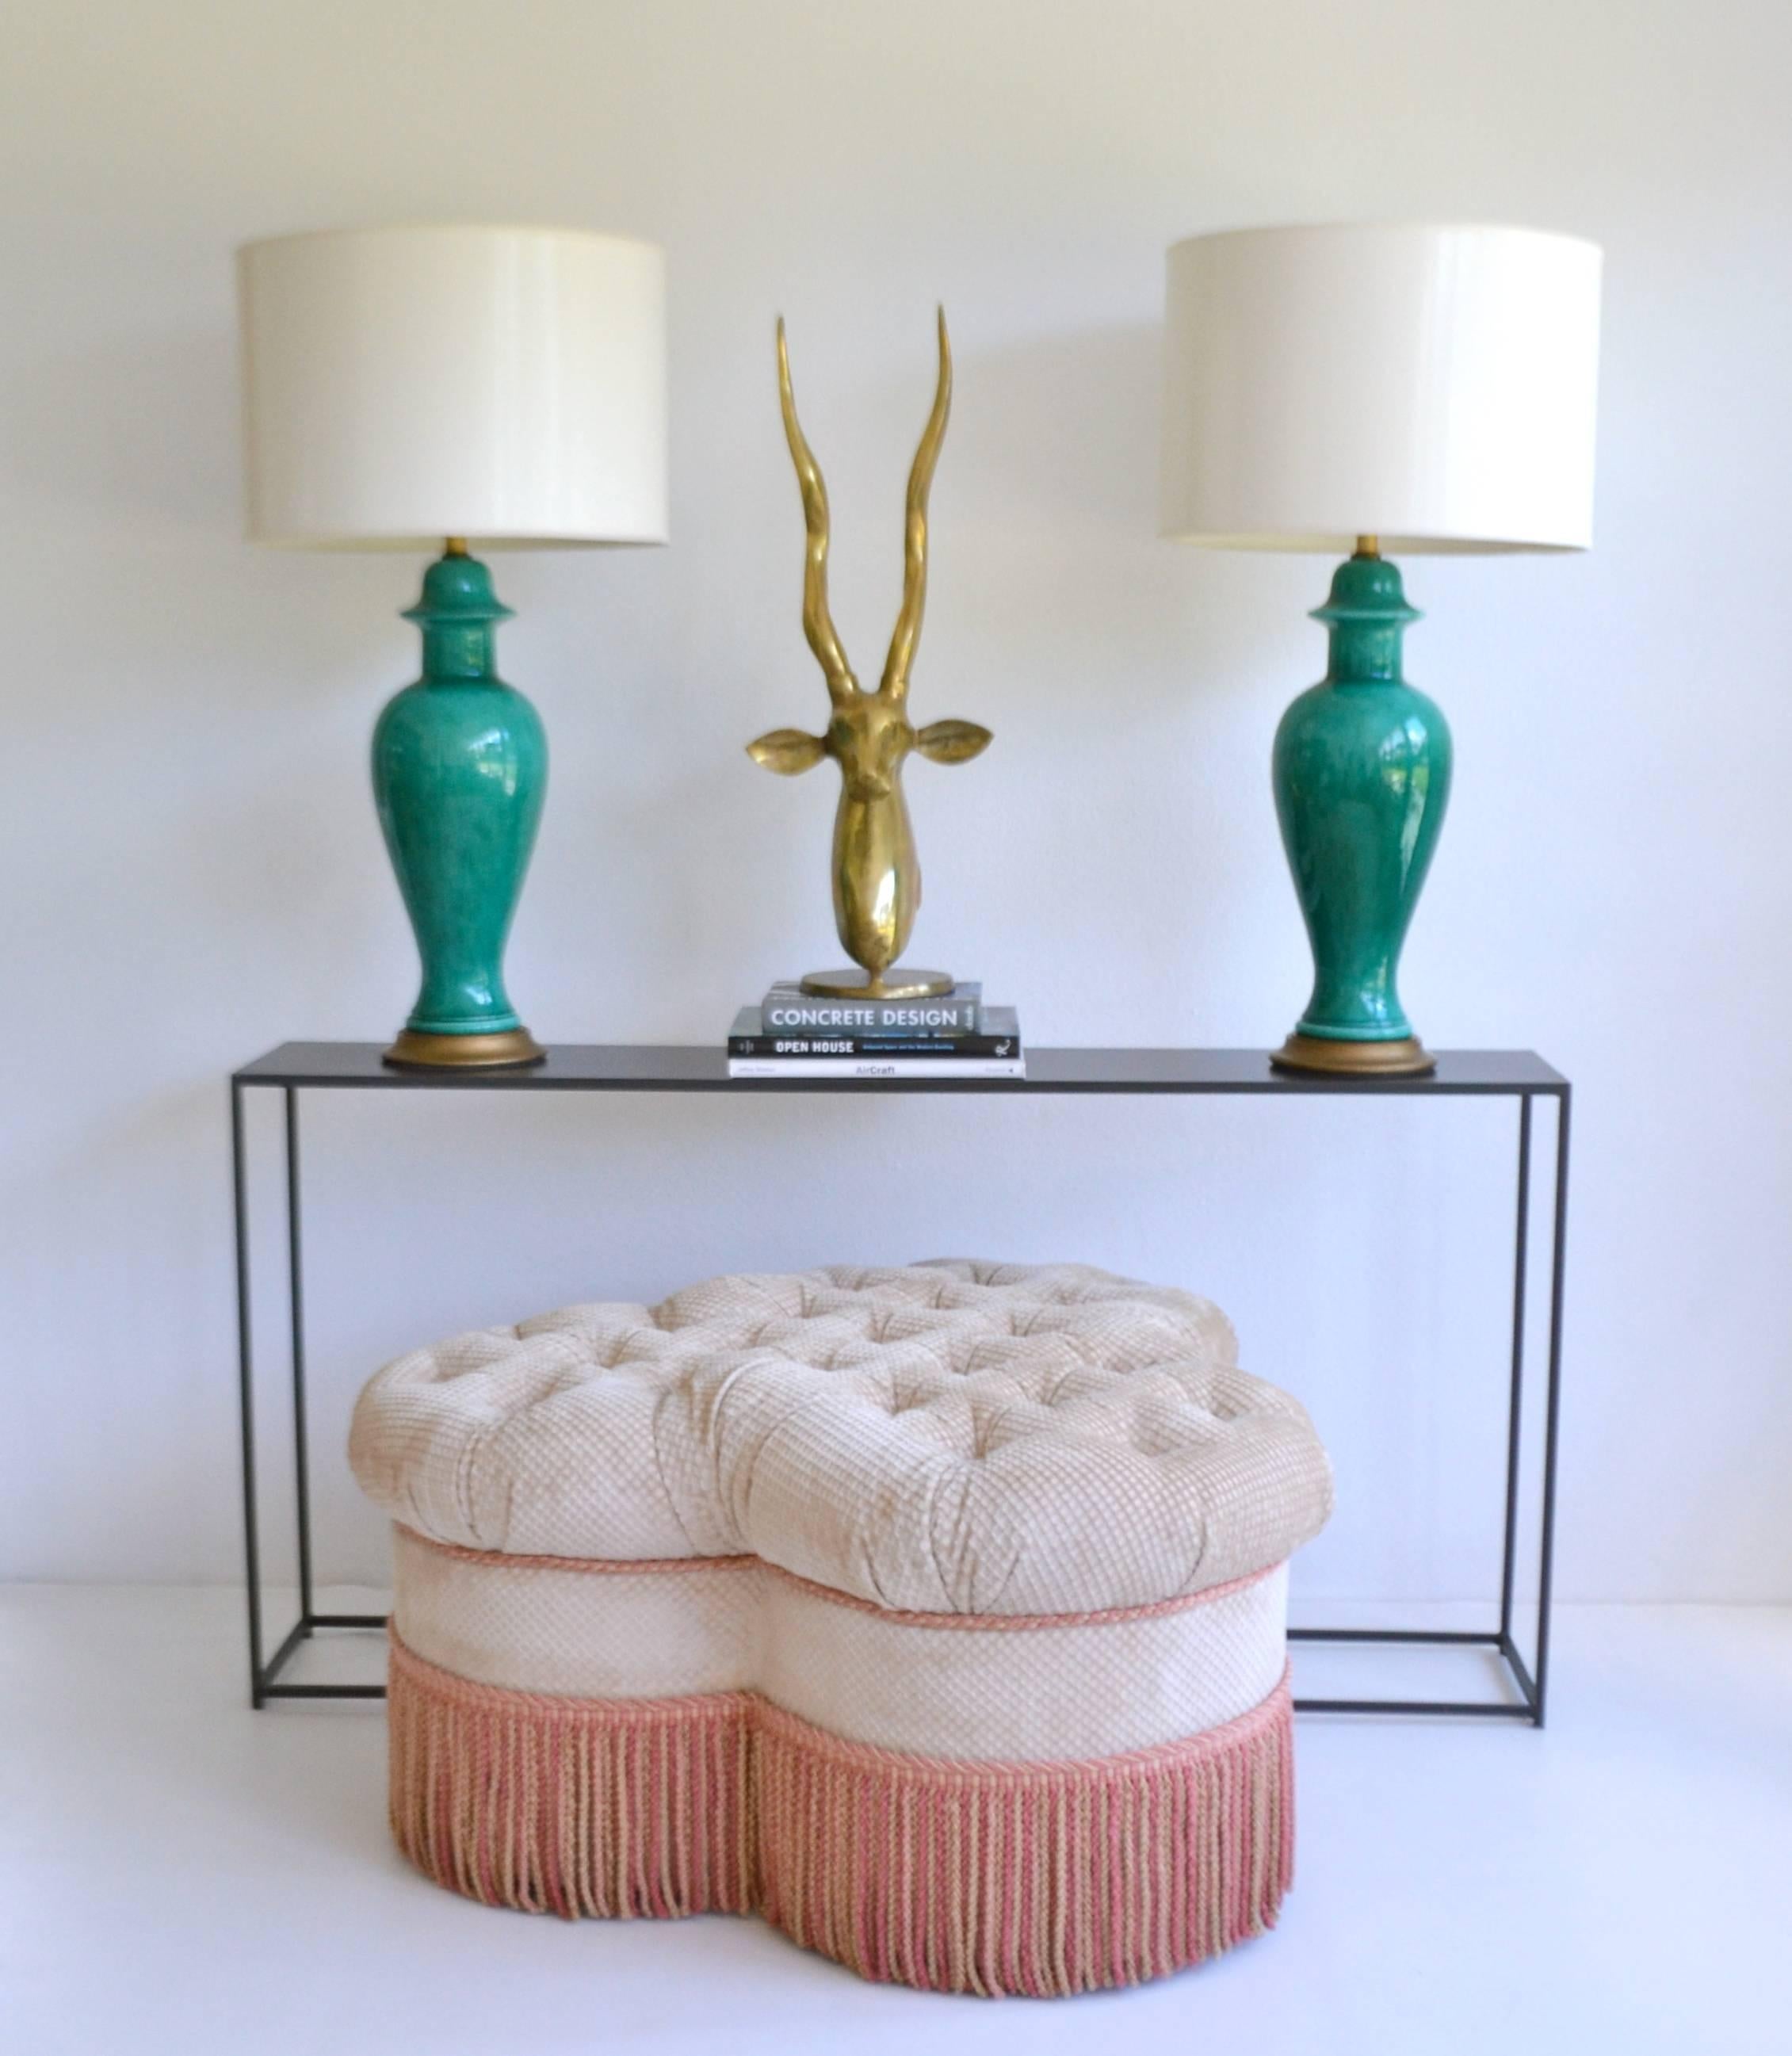 Glamorous Hollywood Regency style clover leaf form tufted ottoman, circa 1970s-1980s. This elegant large-scale custom crafted ottoman/ coffee table with a bullion fringe skirt is upholstered in an embossed cotton velvet fabric. Excellent condition.